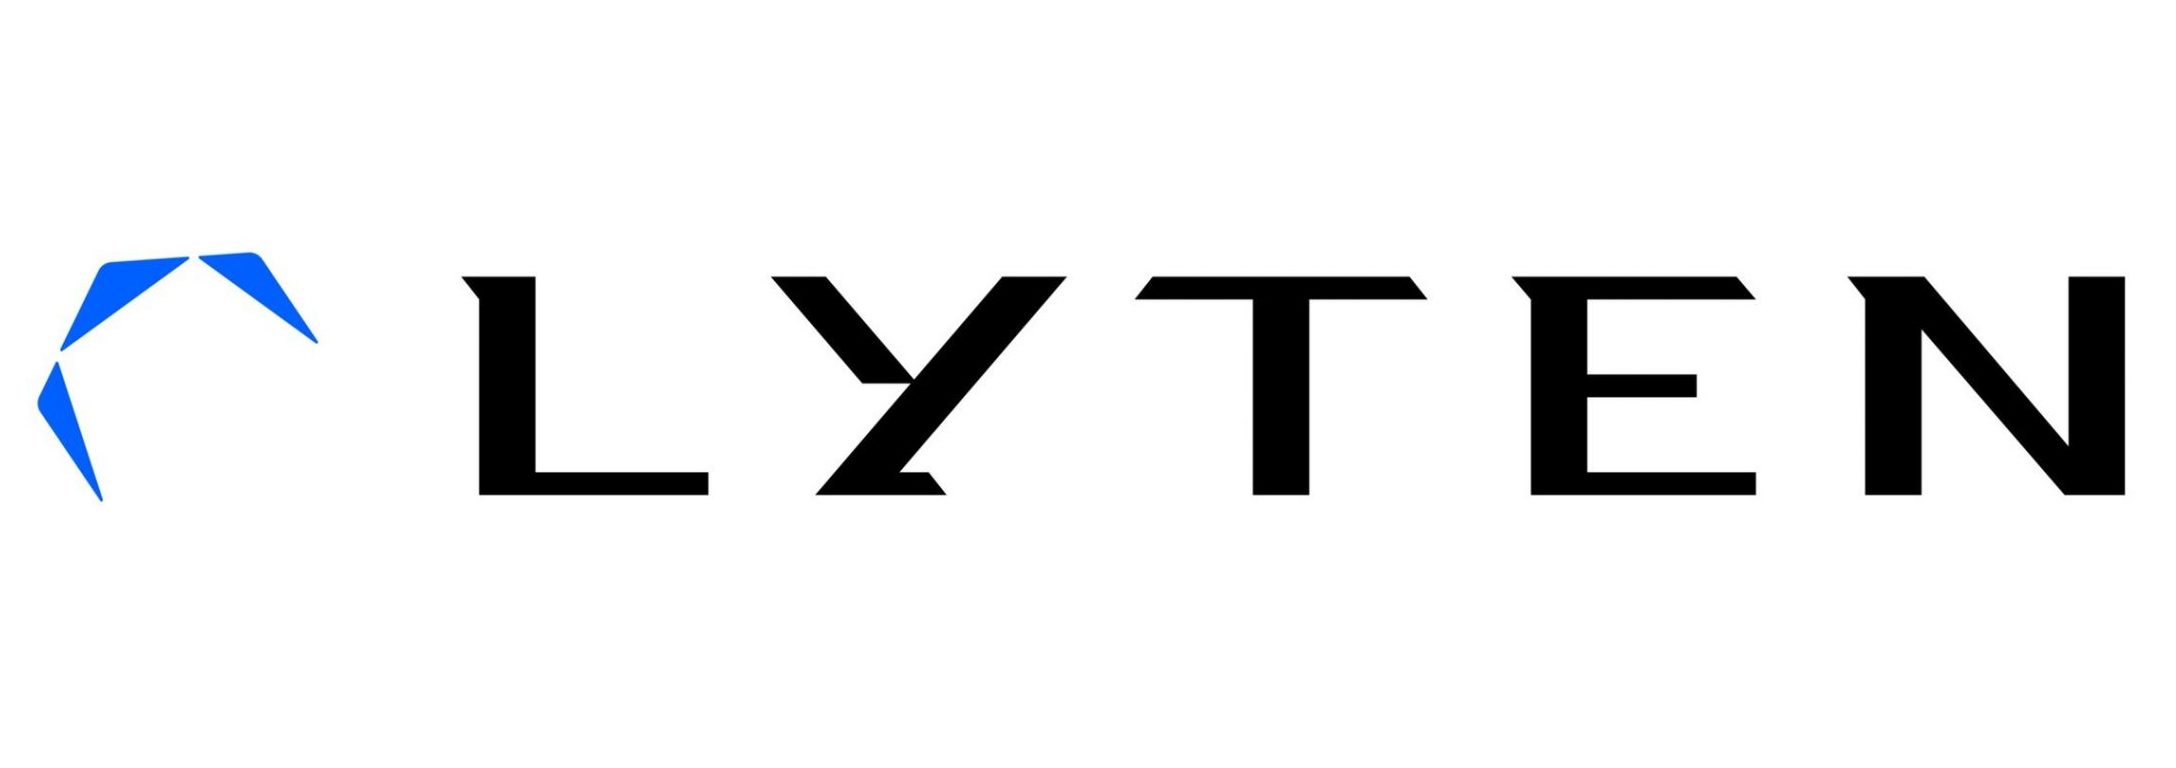 Lyten is an advanced materials company developing a revolutionary lithium-sulfur battery technology for use in a variety of applications in automotive, aerospace, defense, and many other markets.